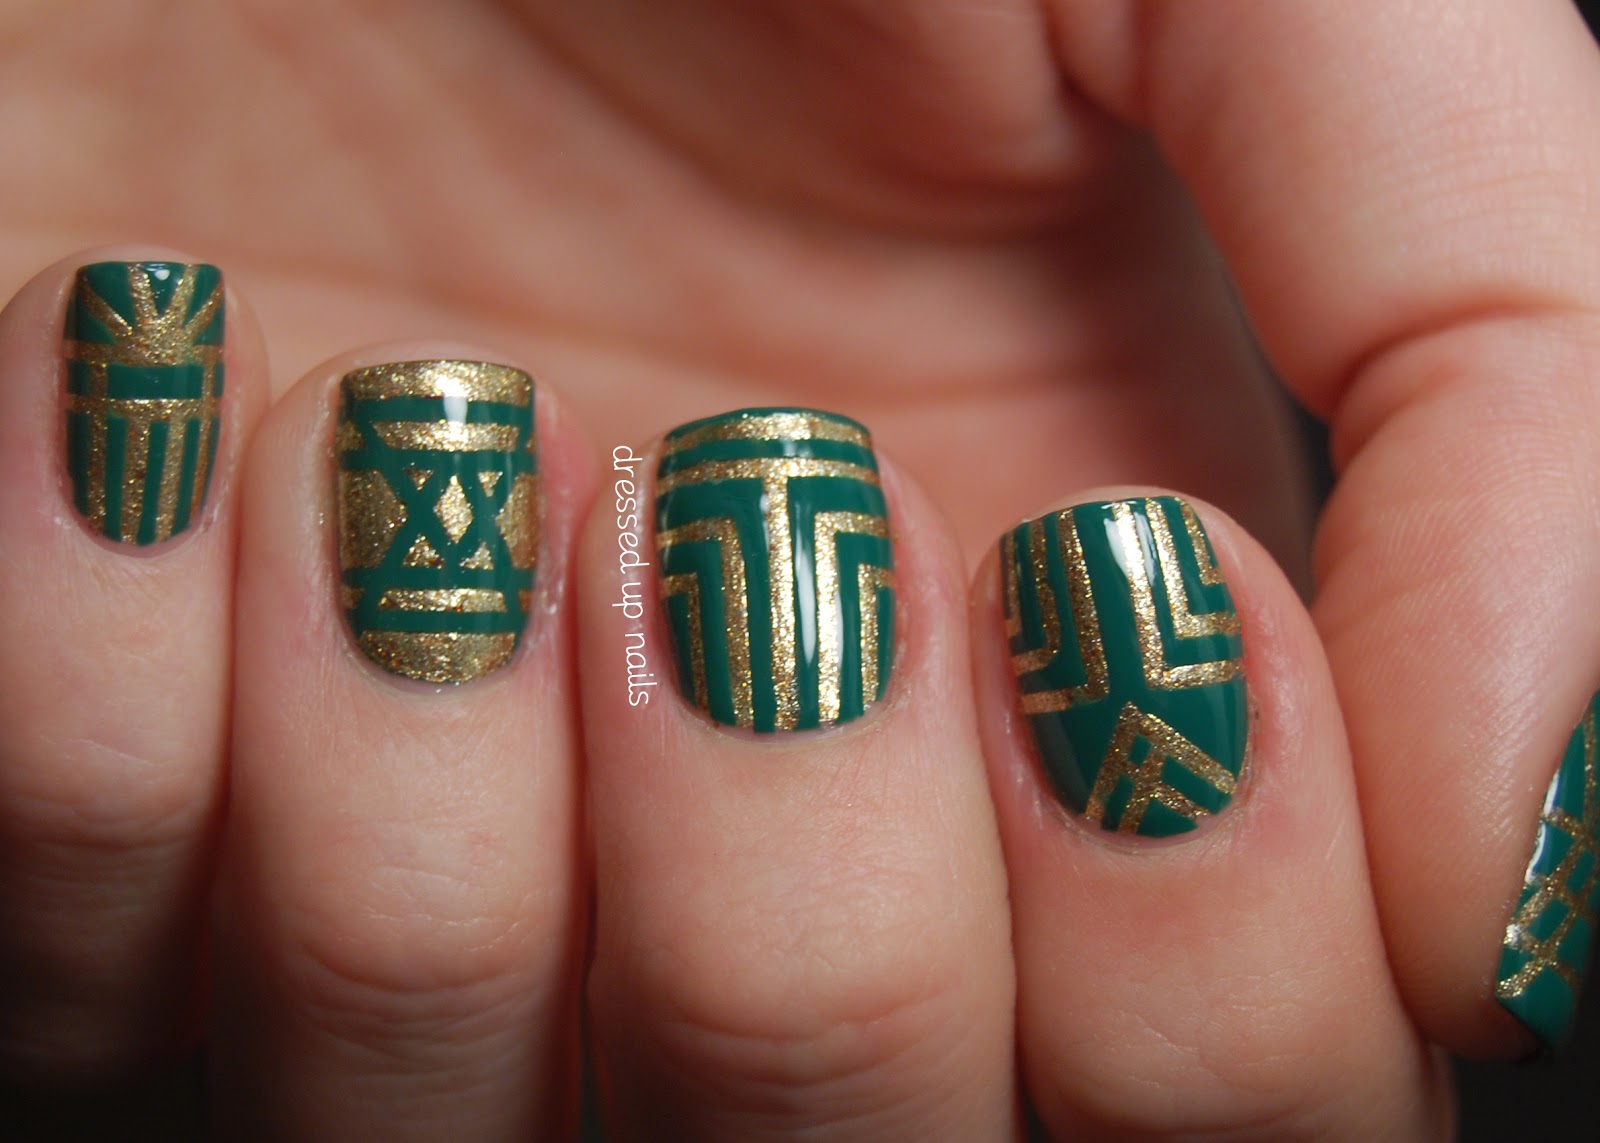 2. Creative Nail Art Ideas with Tape - wide 6